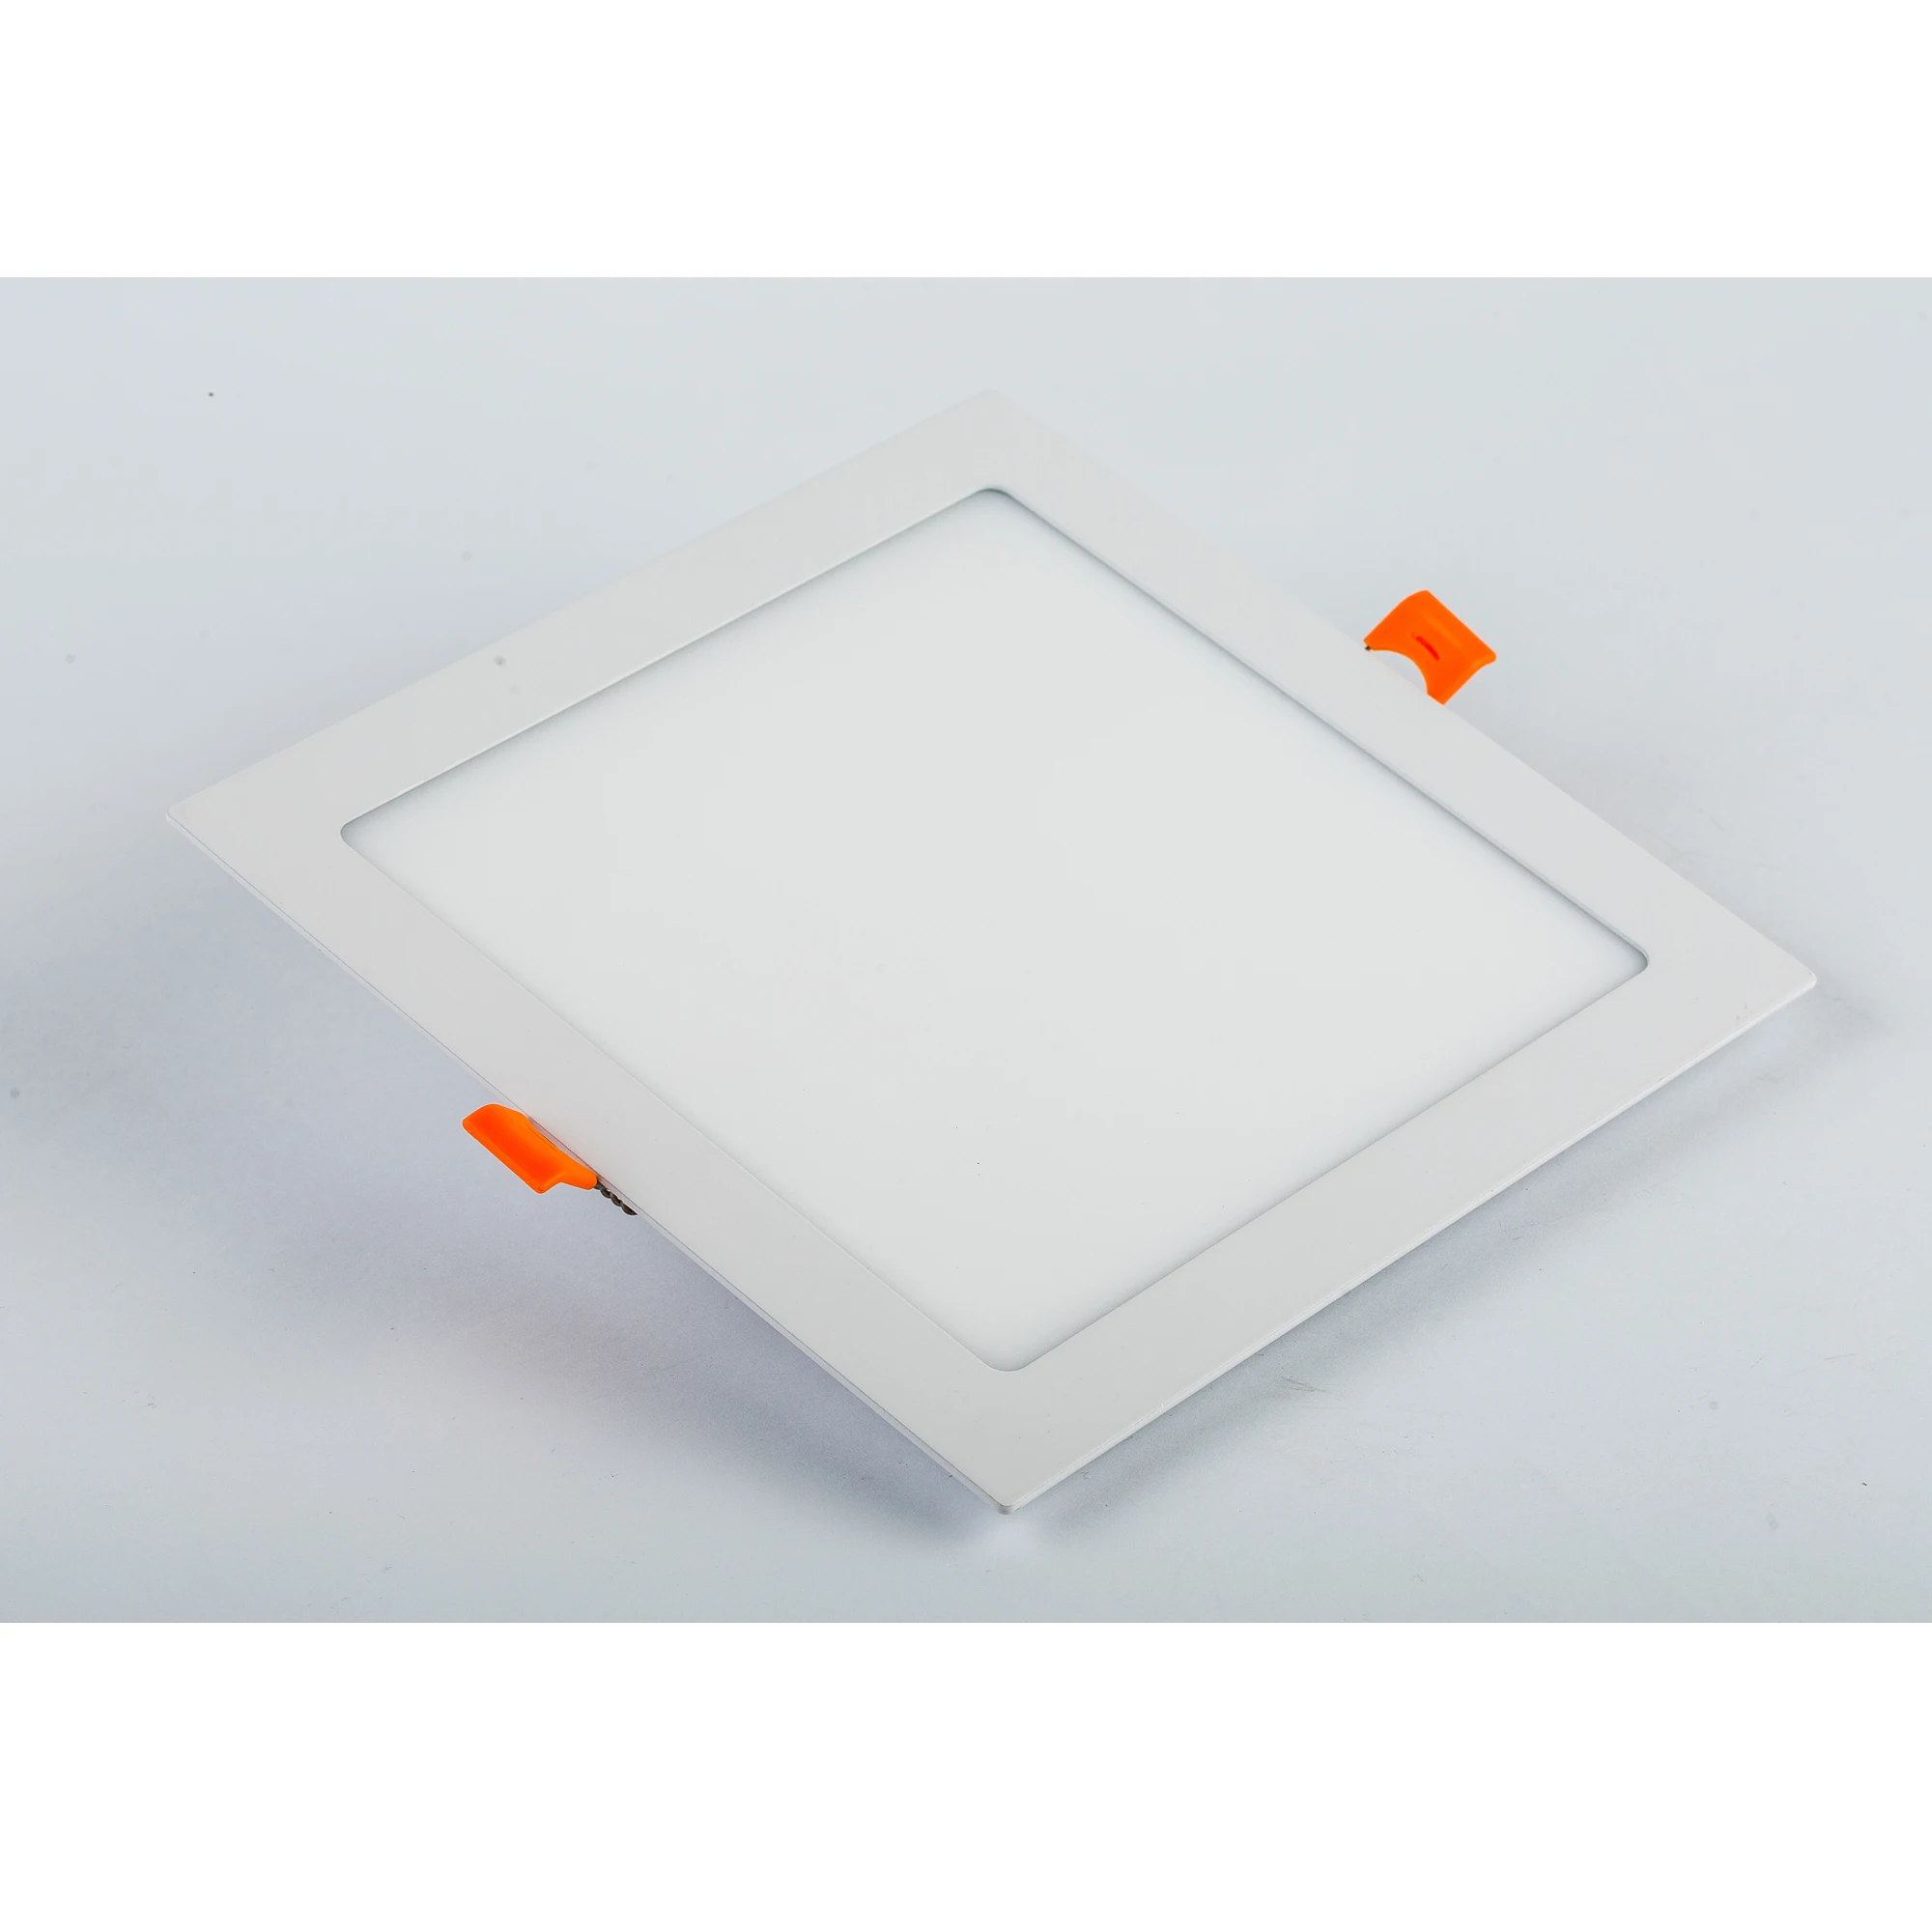 Hot Sell Slim Round Square Led Ceiling Recessed Panel Light/12w cool white 6500k panel light with customized package